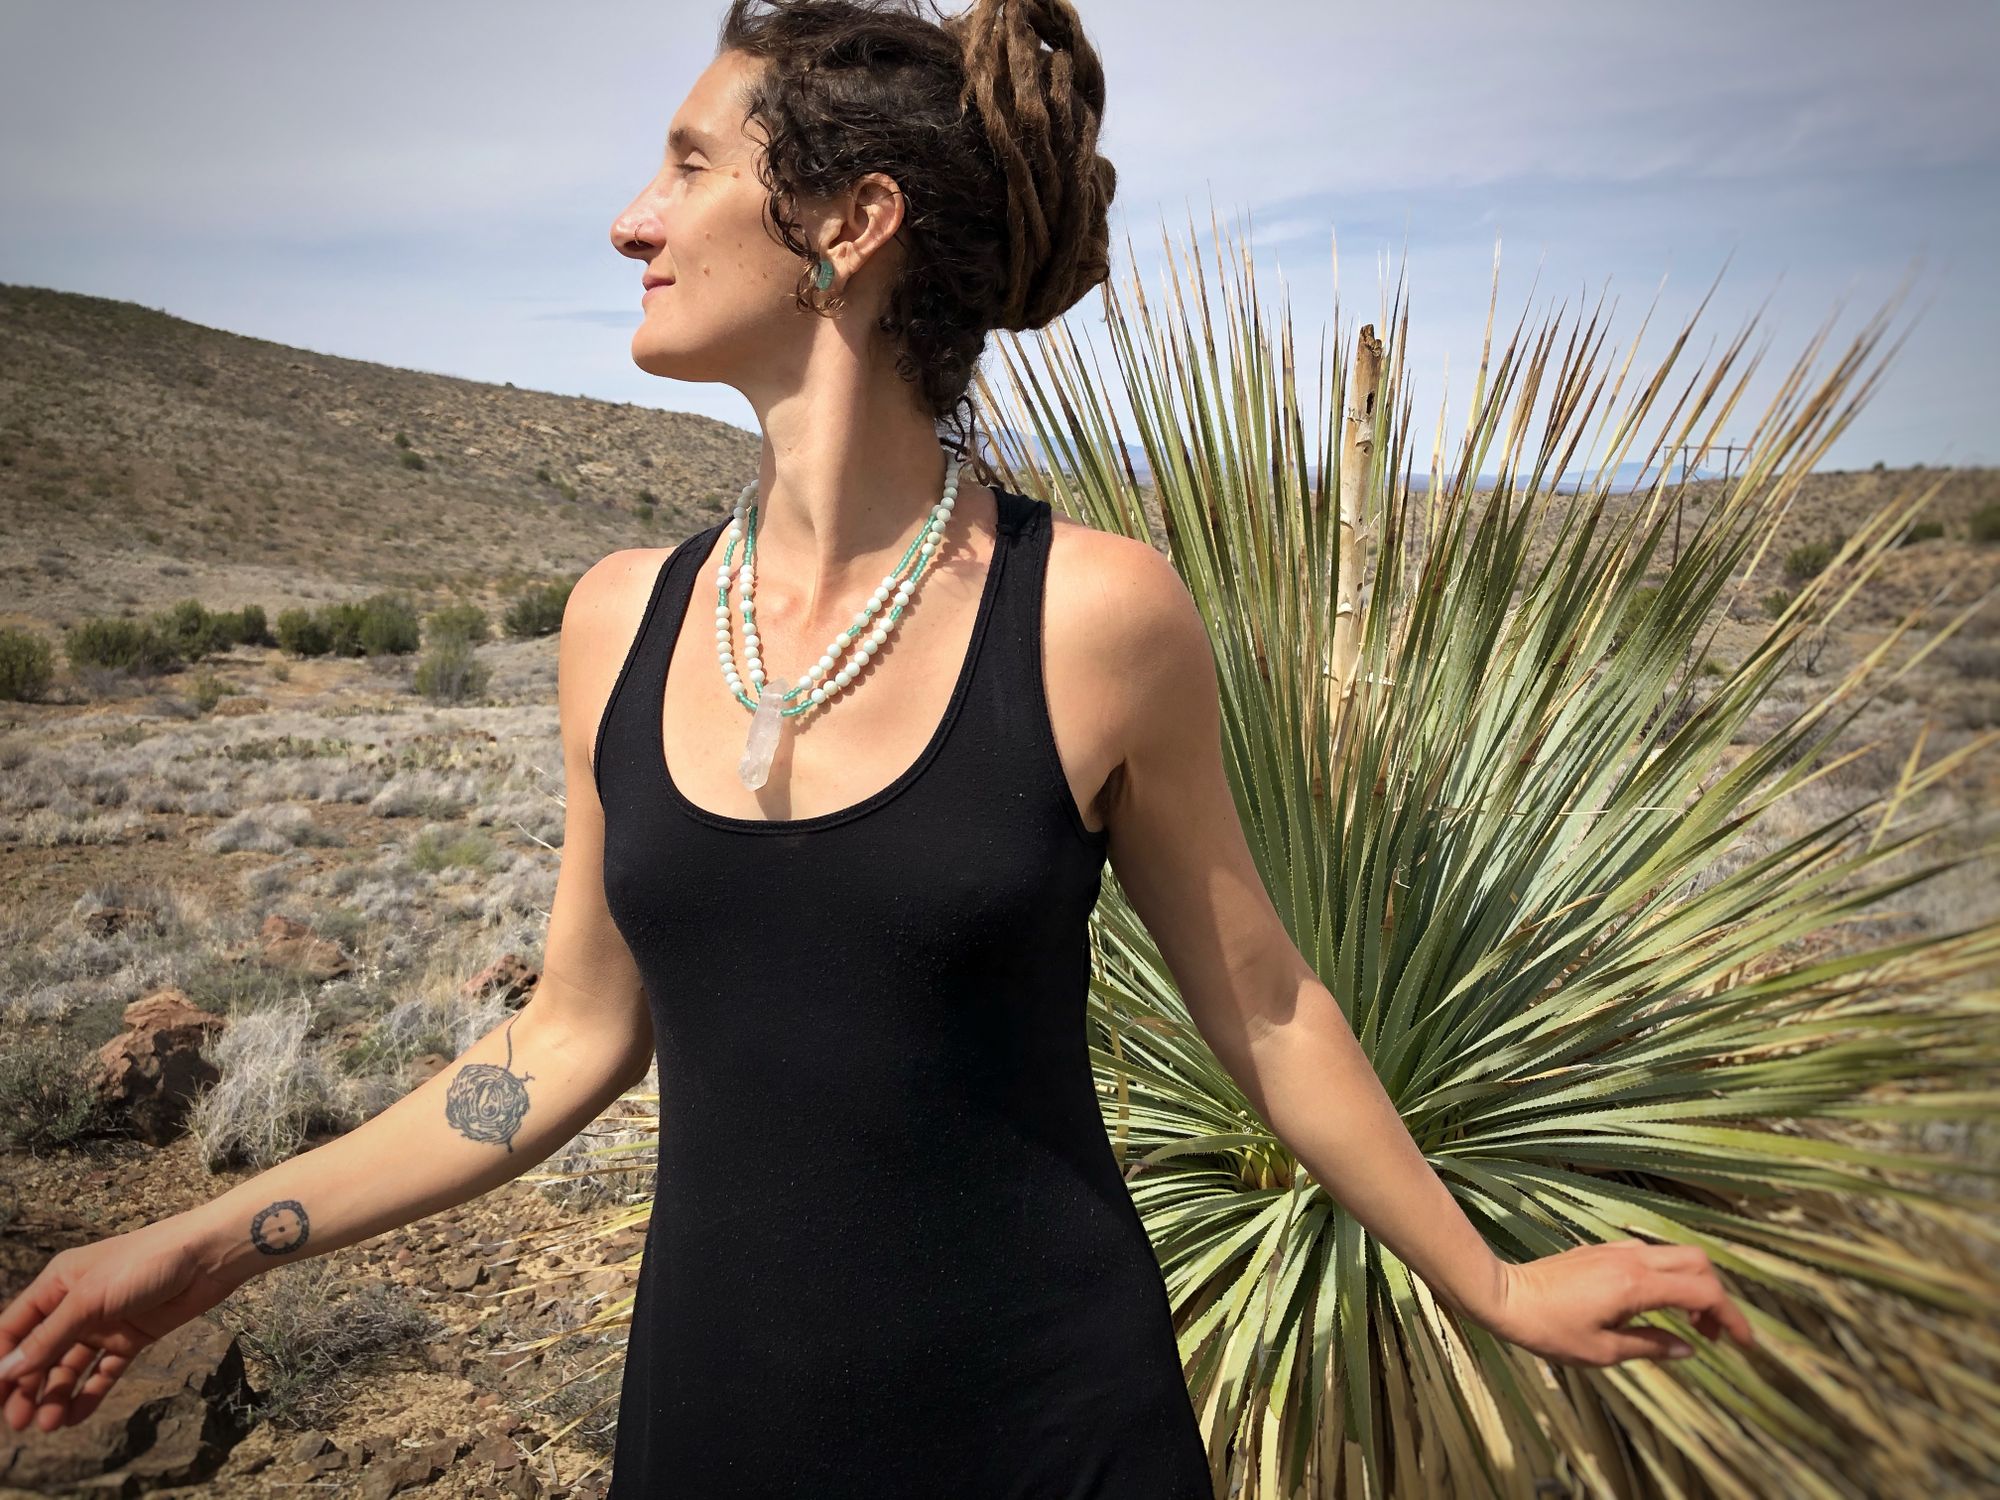 Woman wearing black dress standing by cactus wearing green necklace made of quartz, amazonite and glass beads